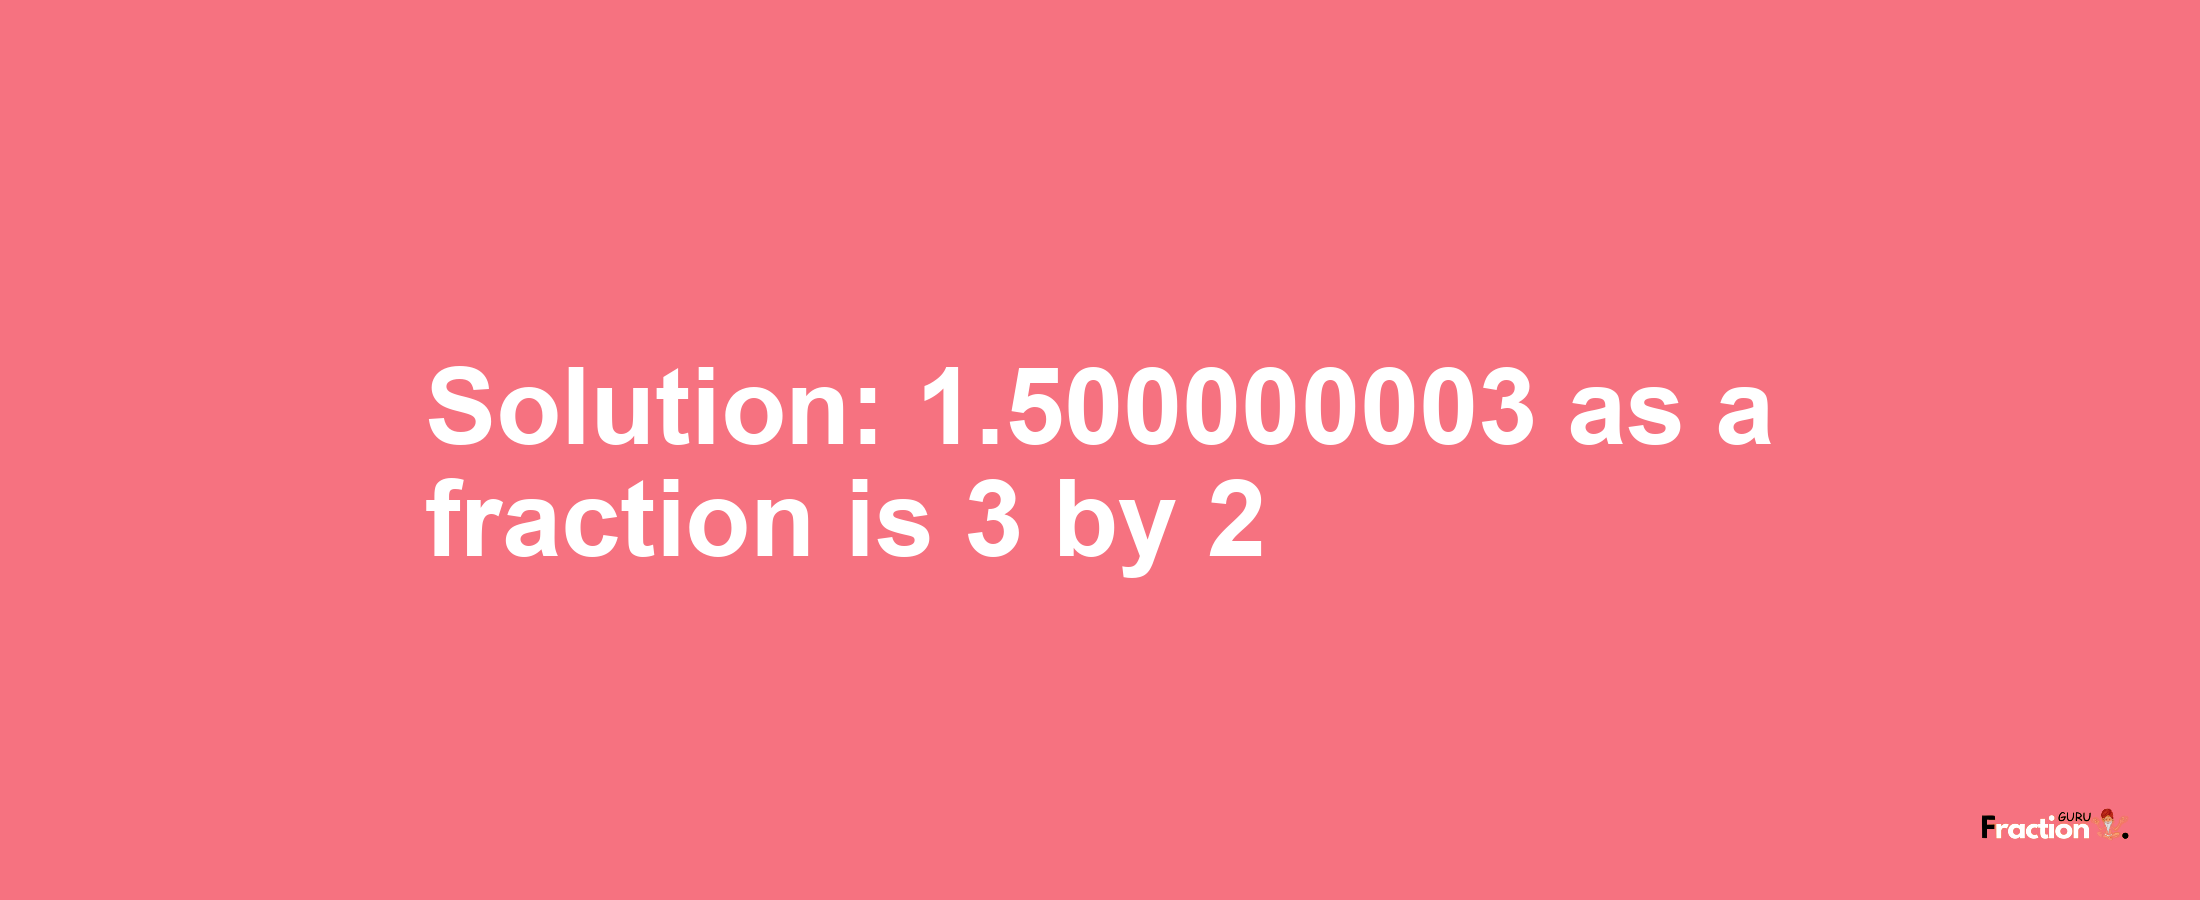 Solution:1.500000003 as a fraction is 3/2